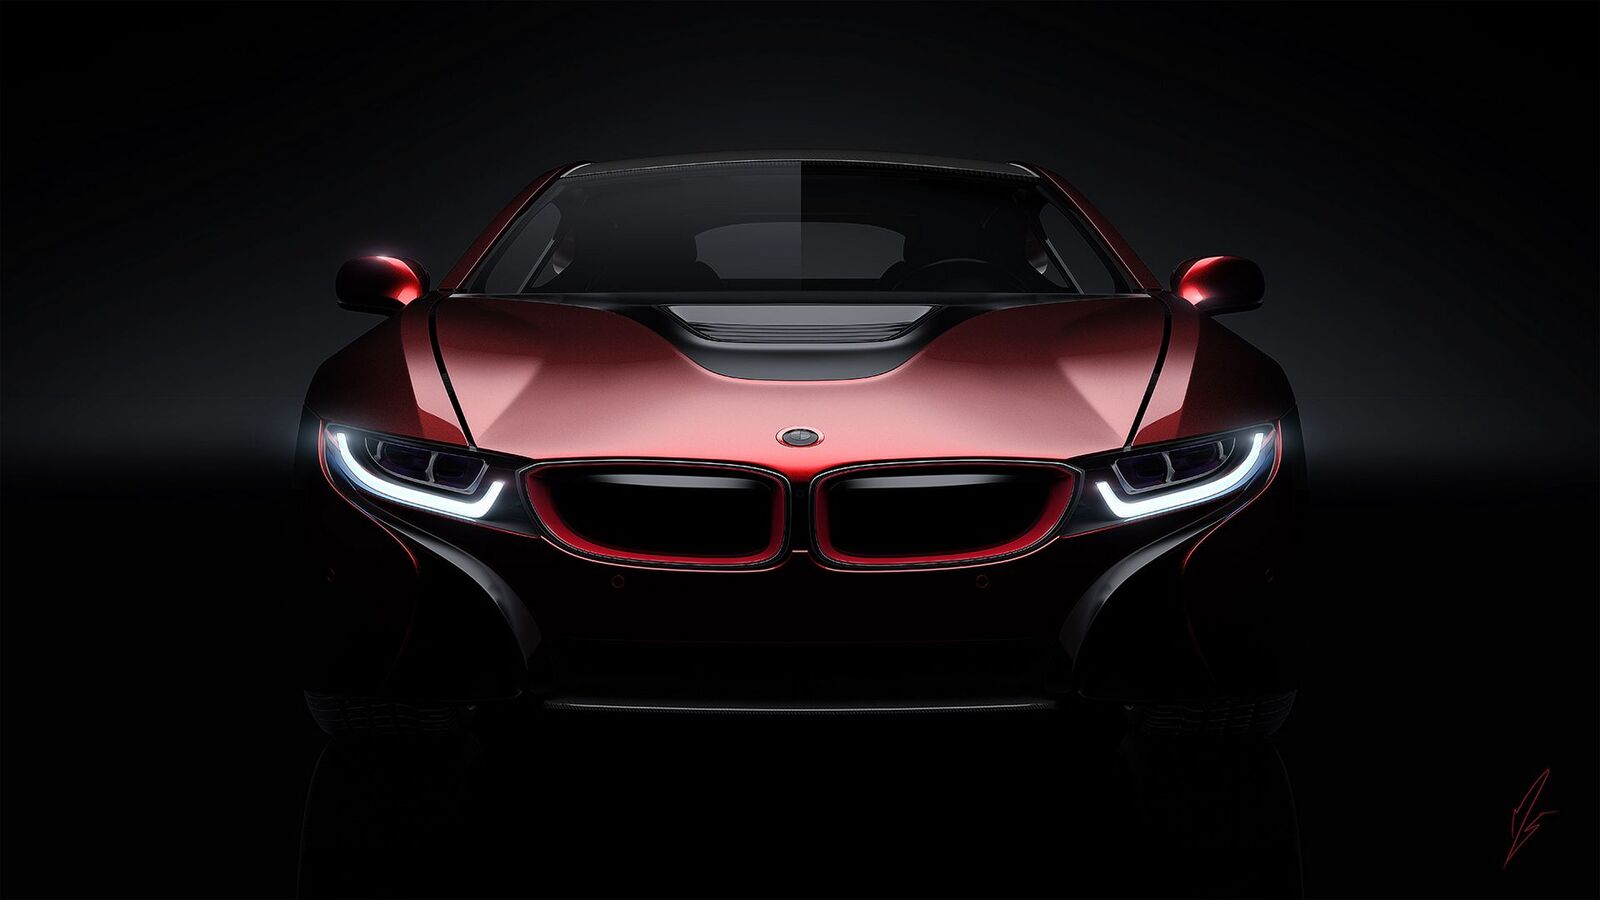 bmw_i8_concept_front_view_98354_1920x1080.jpg